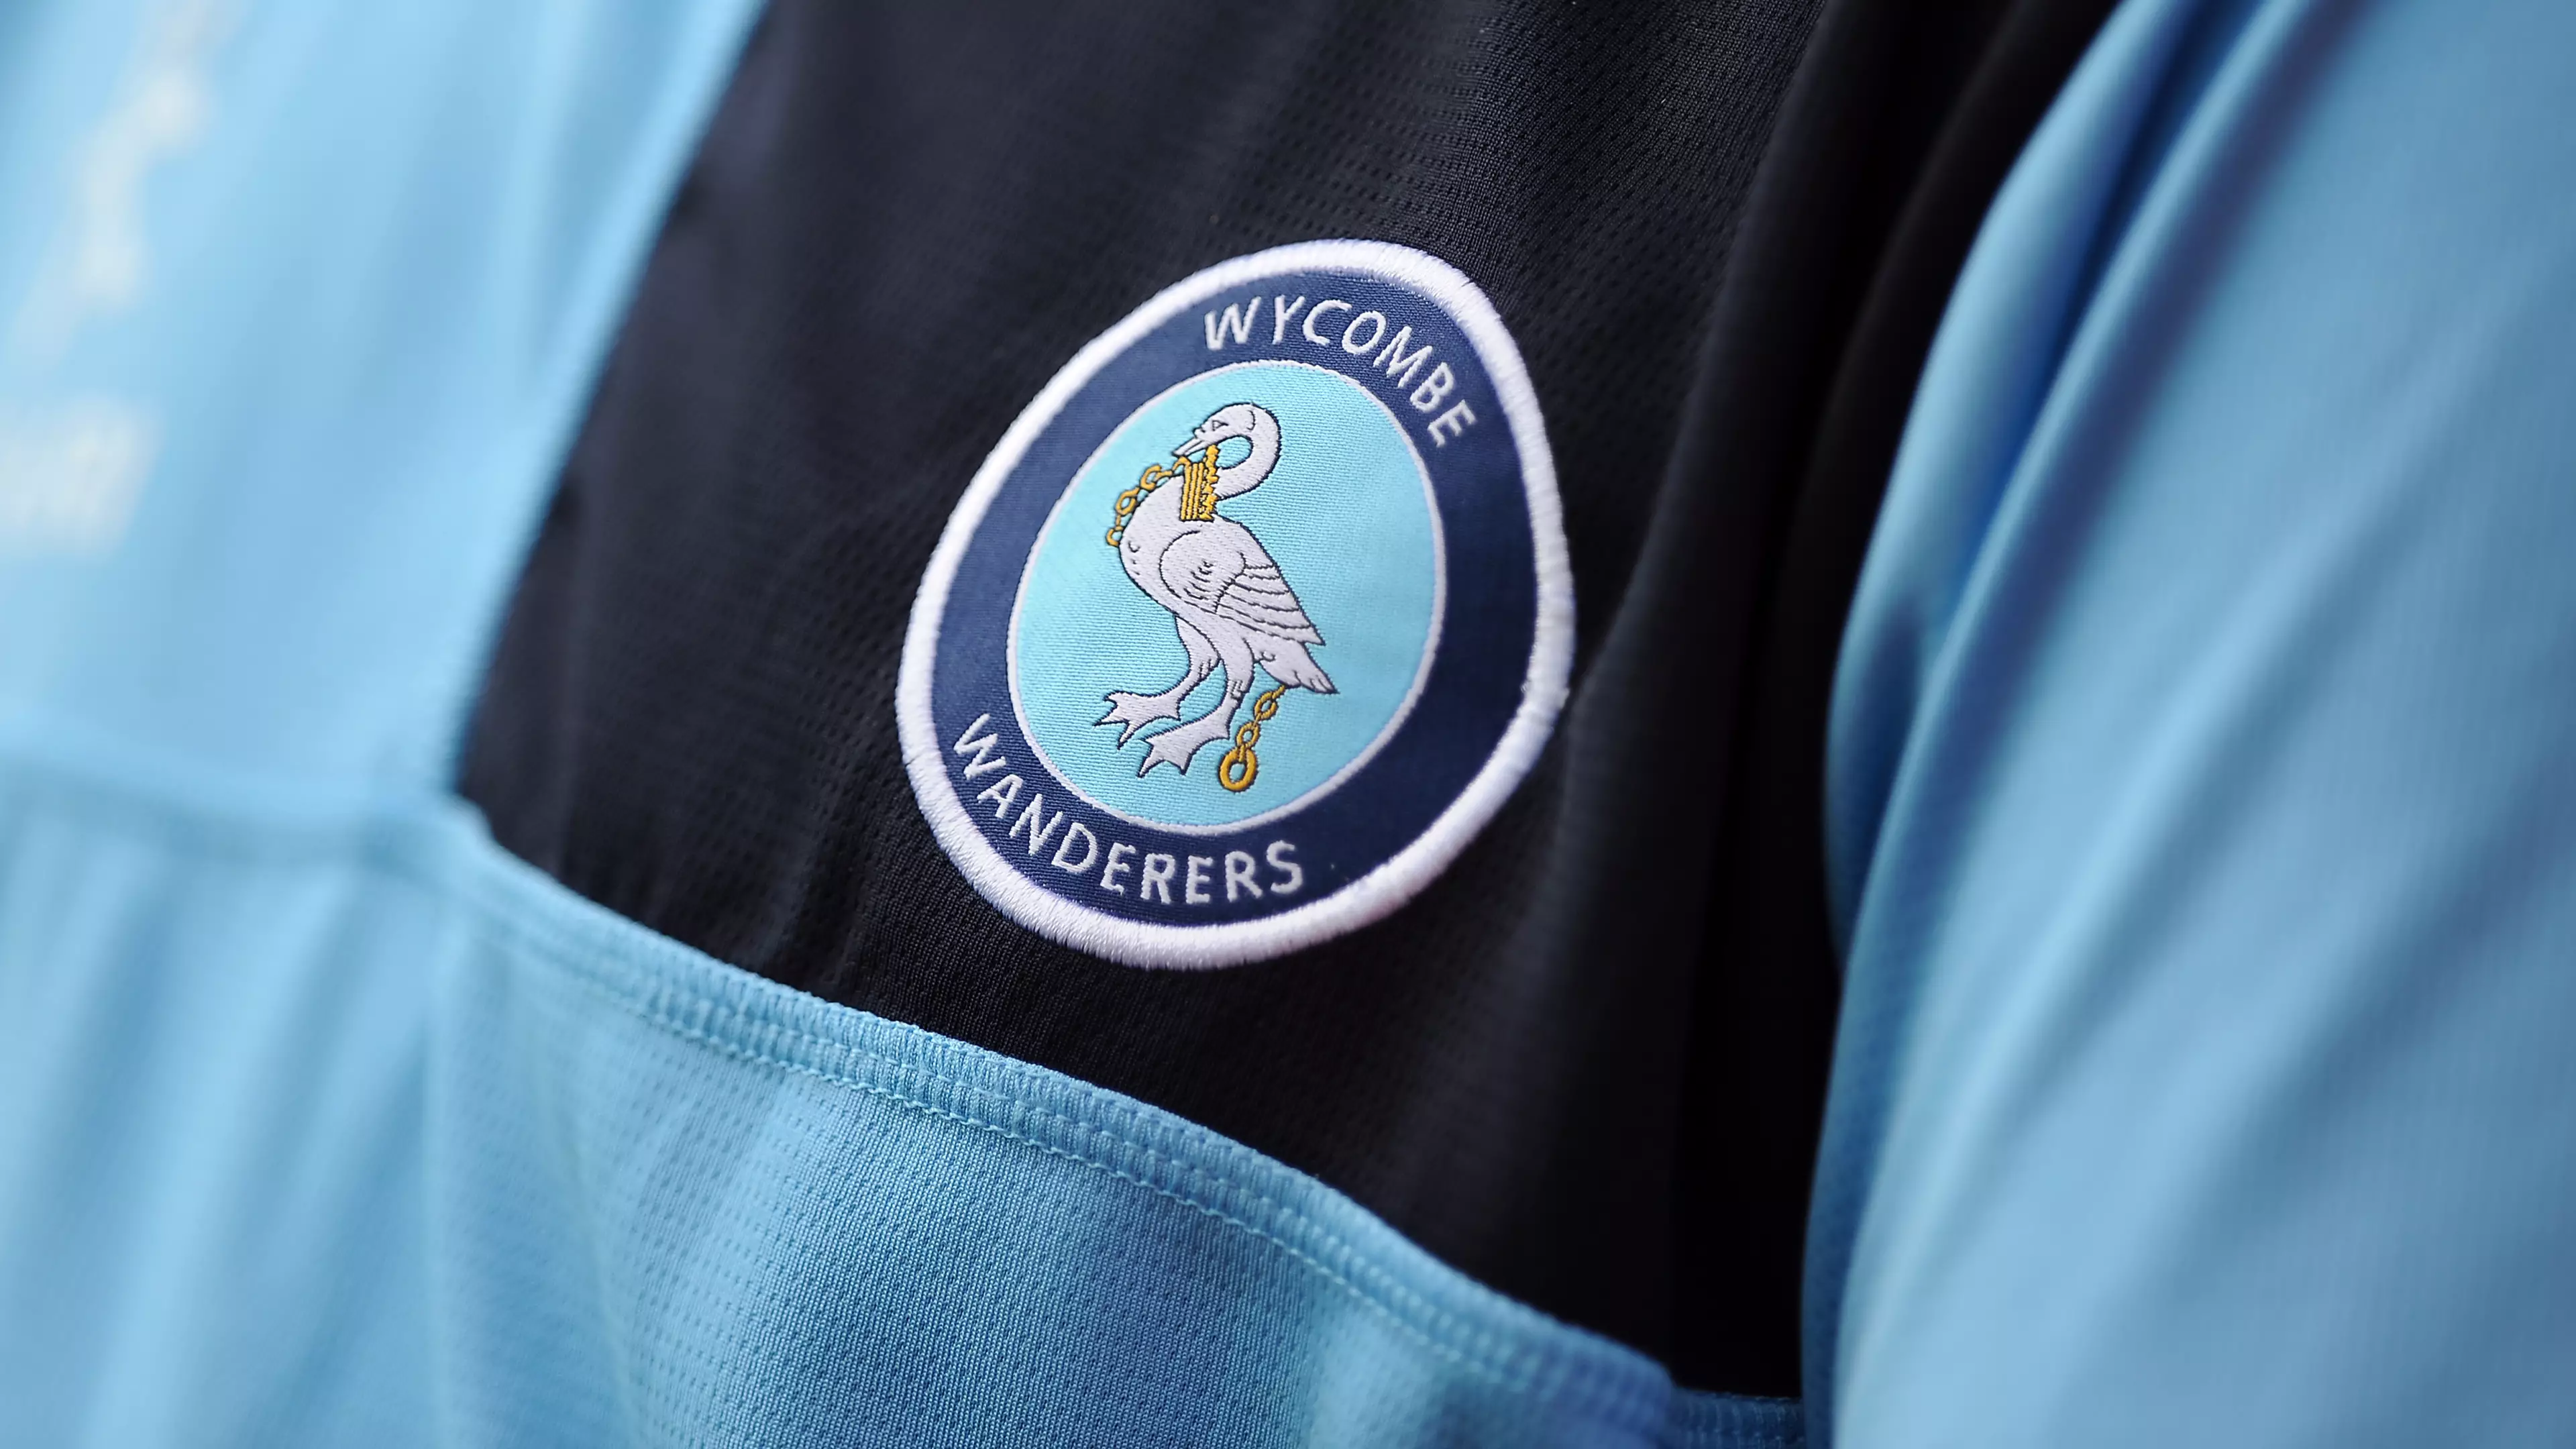 Wycombe Wanderers New Goalkeeper Kit Is Like Nothing You've Seen Before